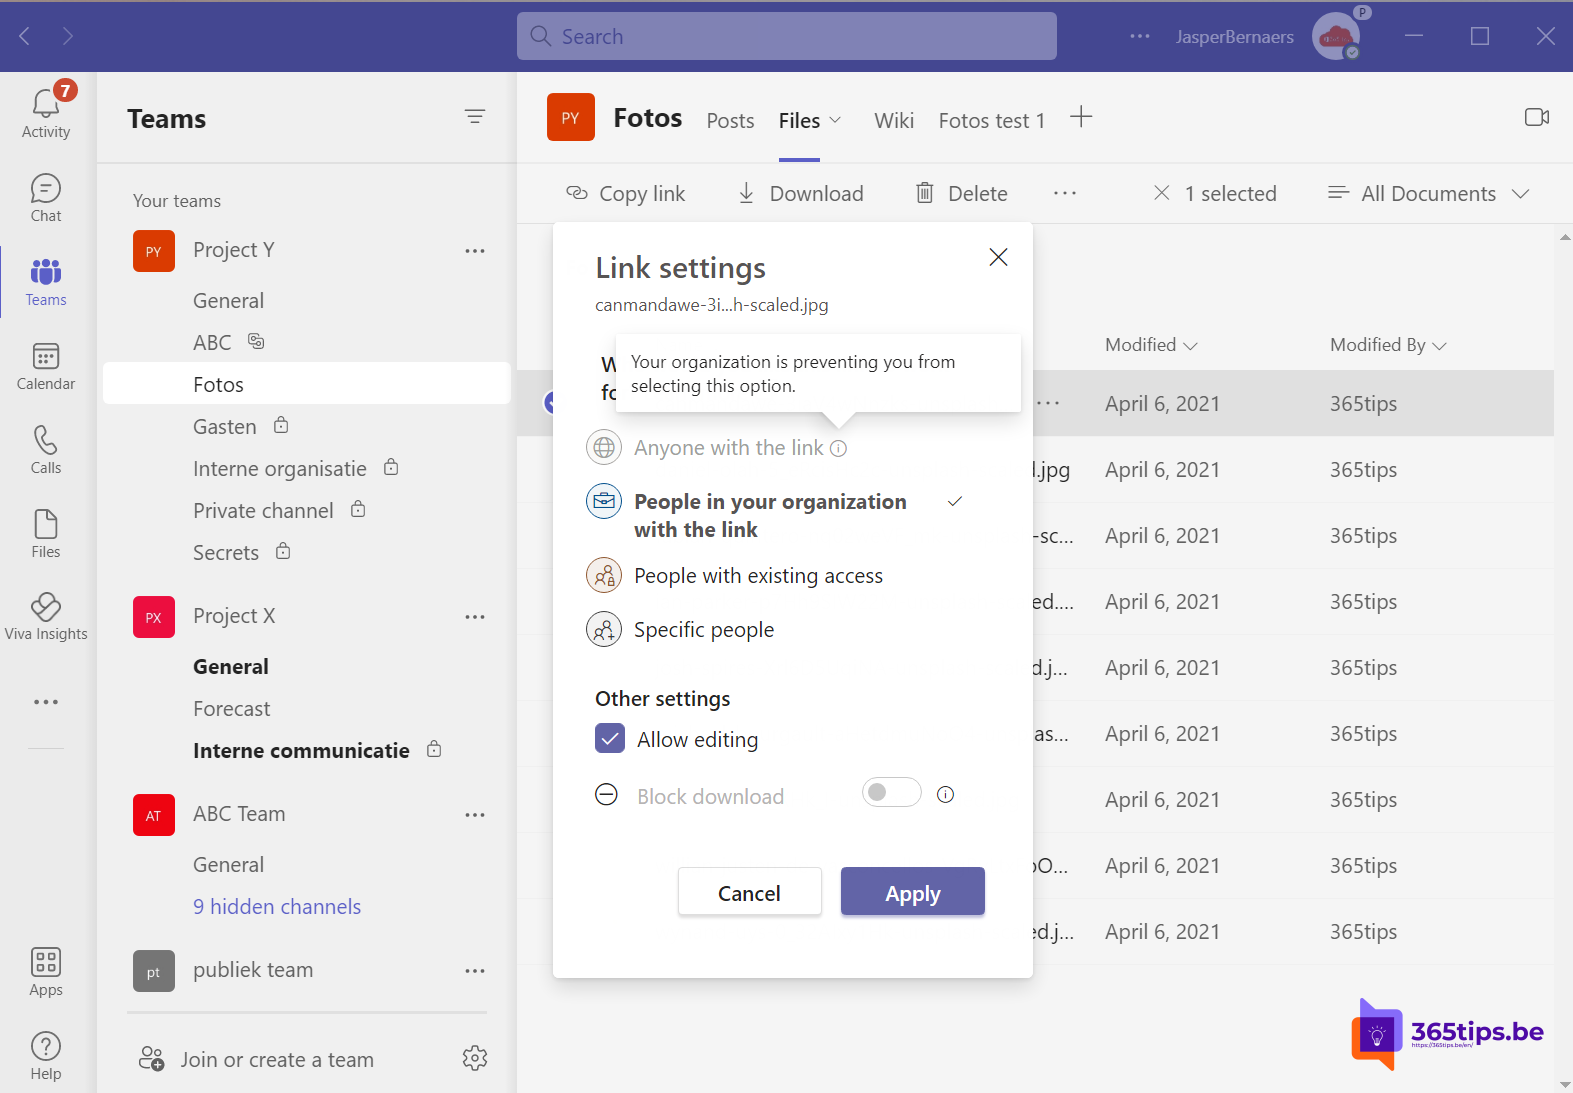 Sharing options are greyed out when sharing from Microsoft Teams, SharePoint or OneDrive